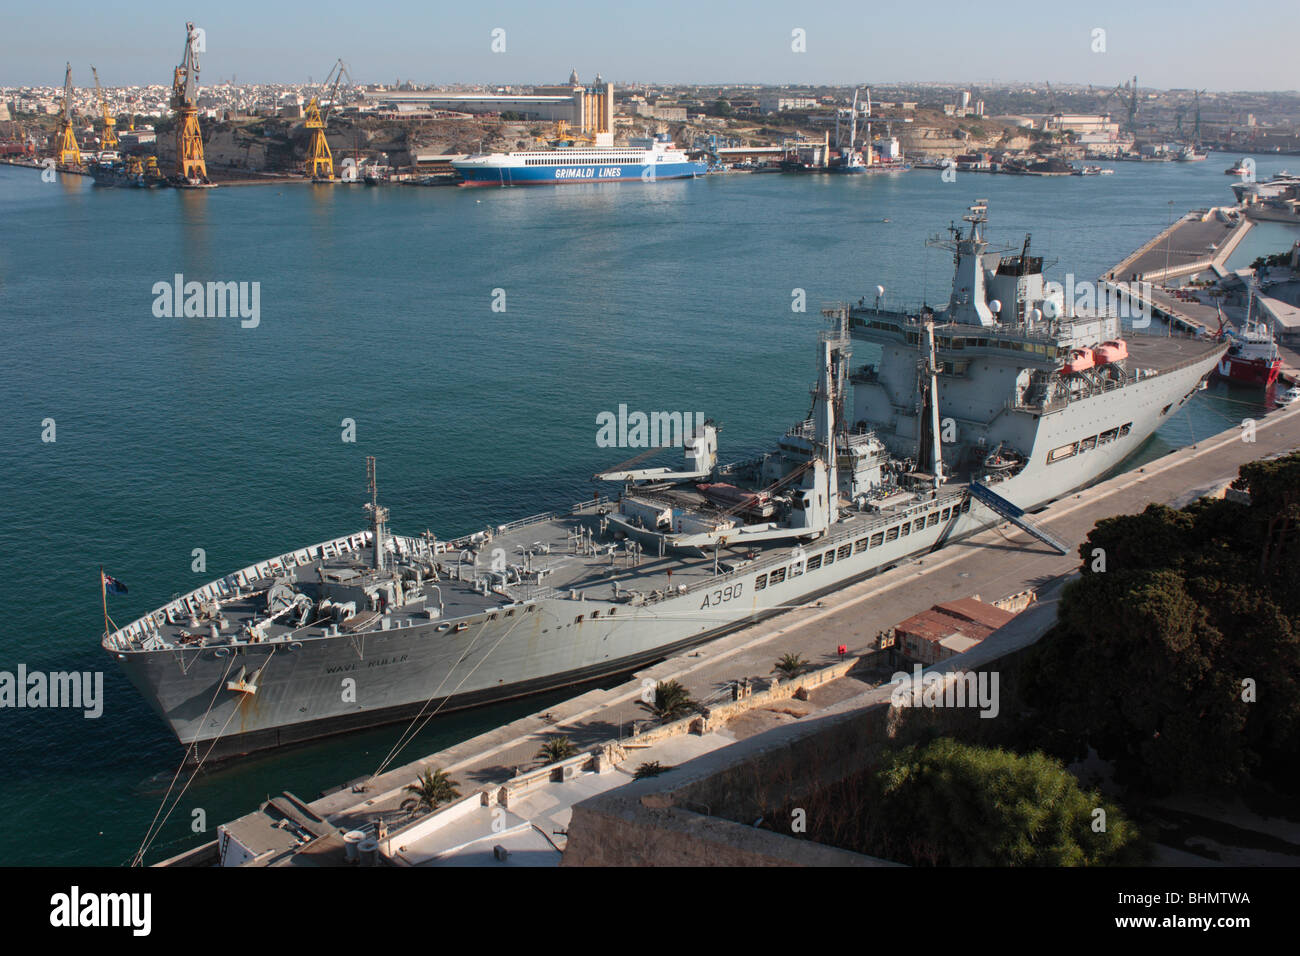 The Royal Fleet Auxiliary naval resupply ship Wave Ruler in Malta's Grand Harbour Stock Photo